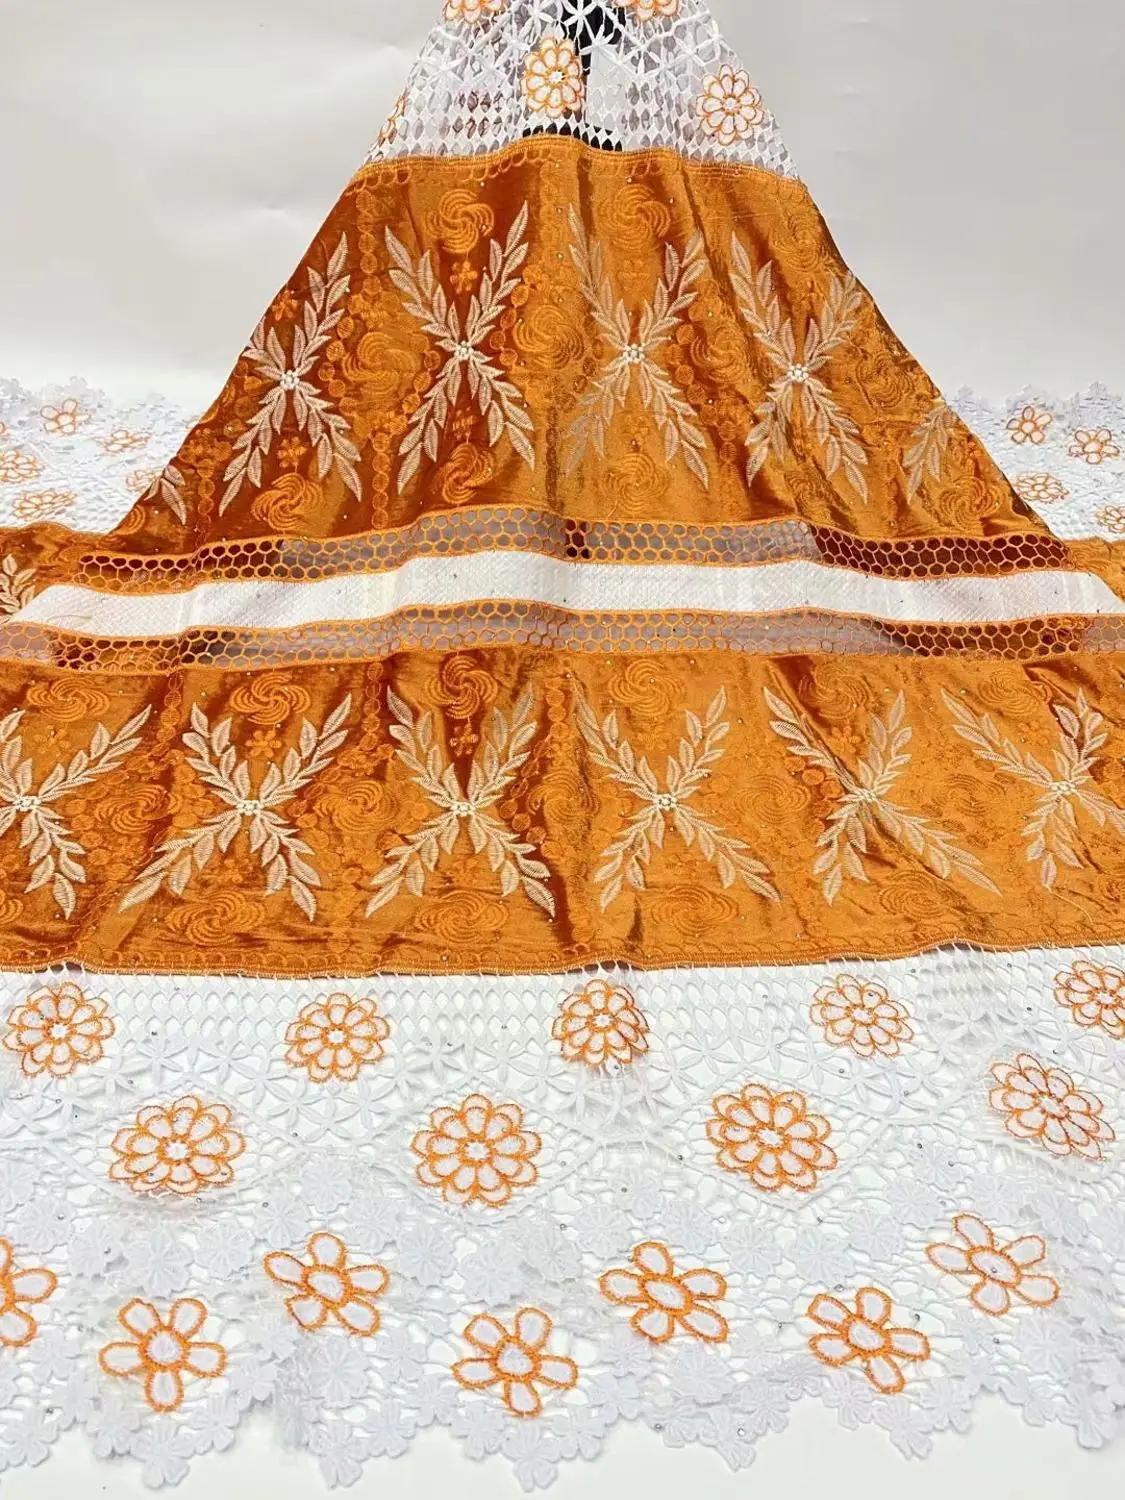 

Rhinestones Burnt Orange White African Lace Velvet Fabric With Guipure Border Sewing Crafts For Wedding Garment Dress